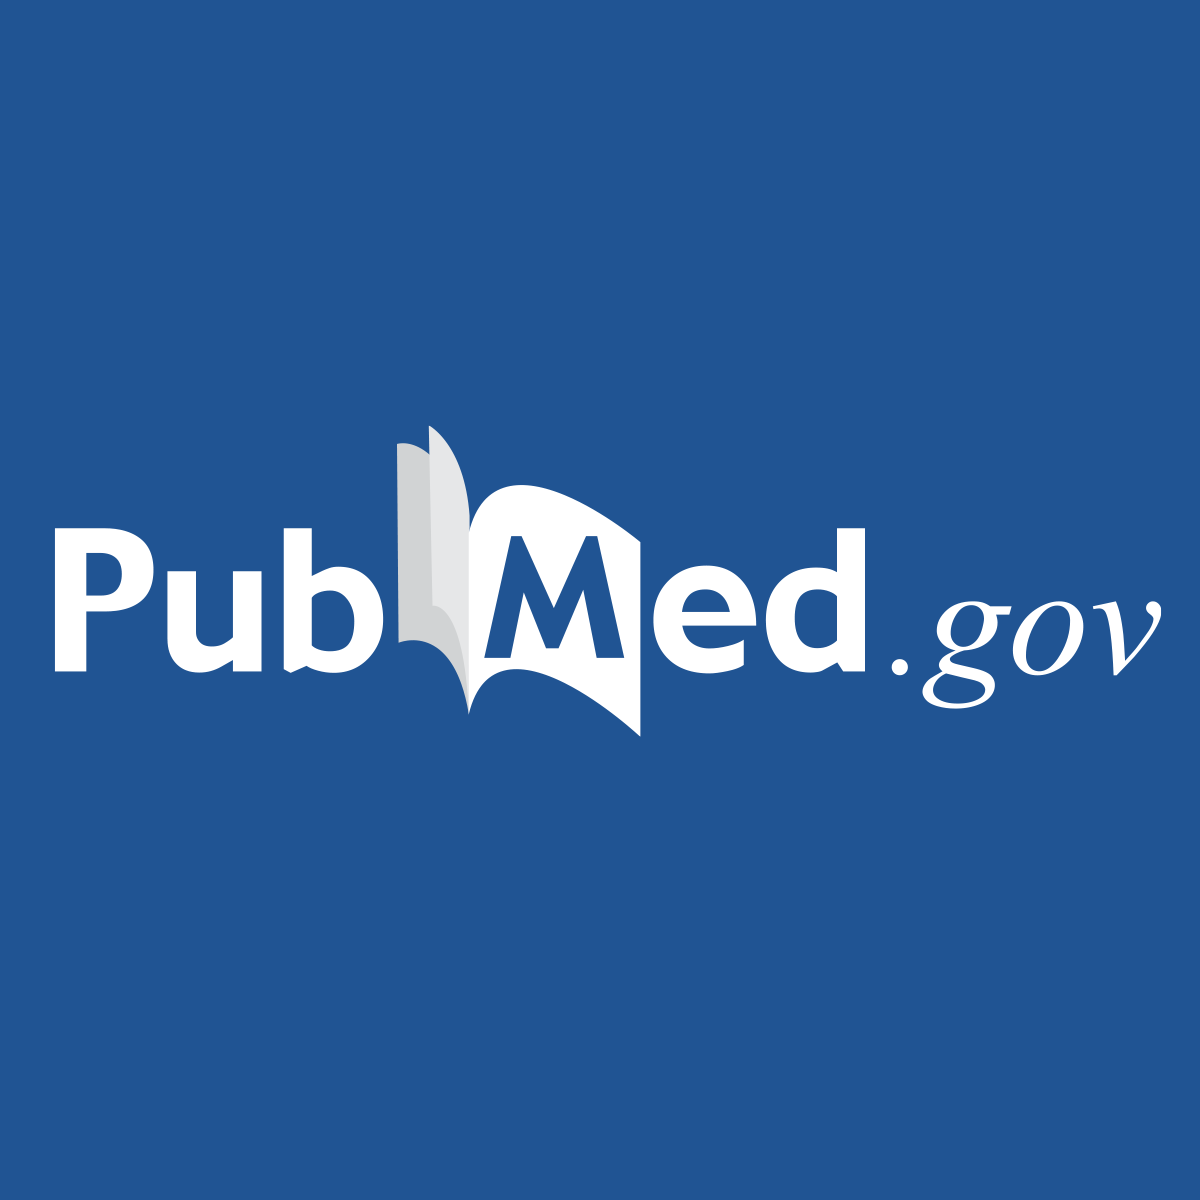 Patient misidentification in laboratory medicine: a qualitative analysis of 227 root cause analysis reports in the Veterans Health Administration - PubMed